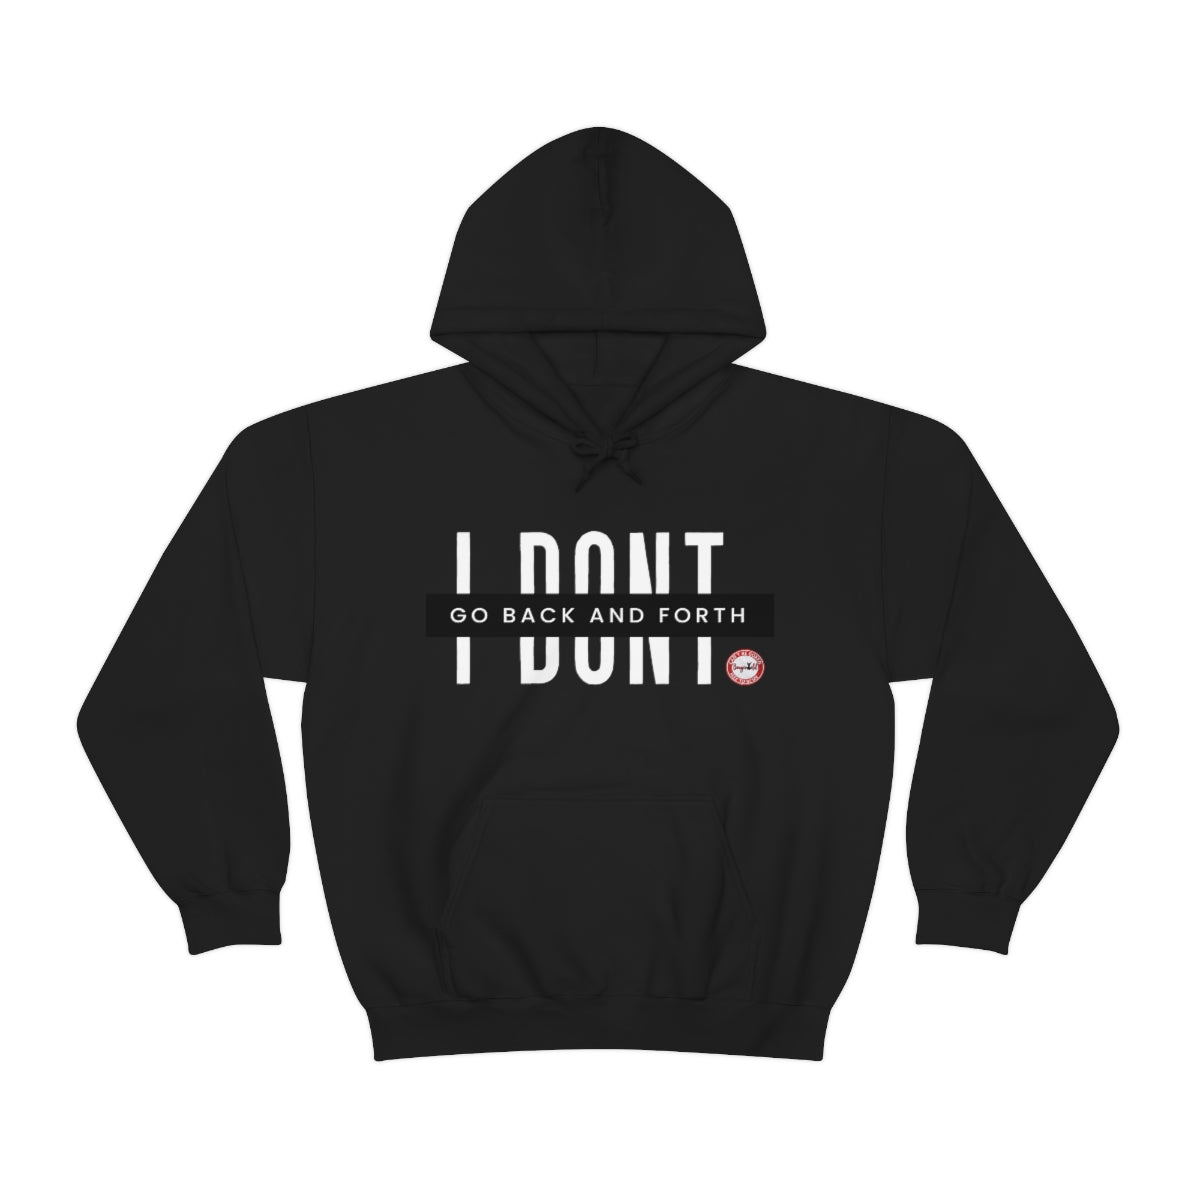 I don't go back and forth Unisex Heavy Blend™ Hooded Sweatshirt